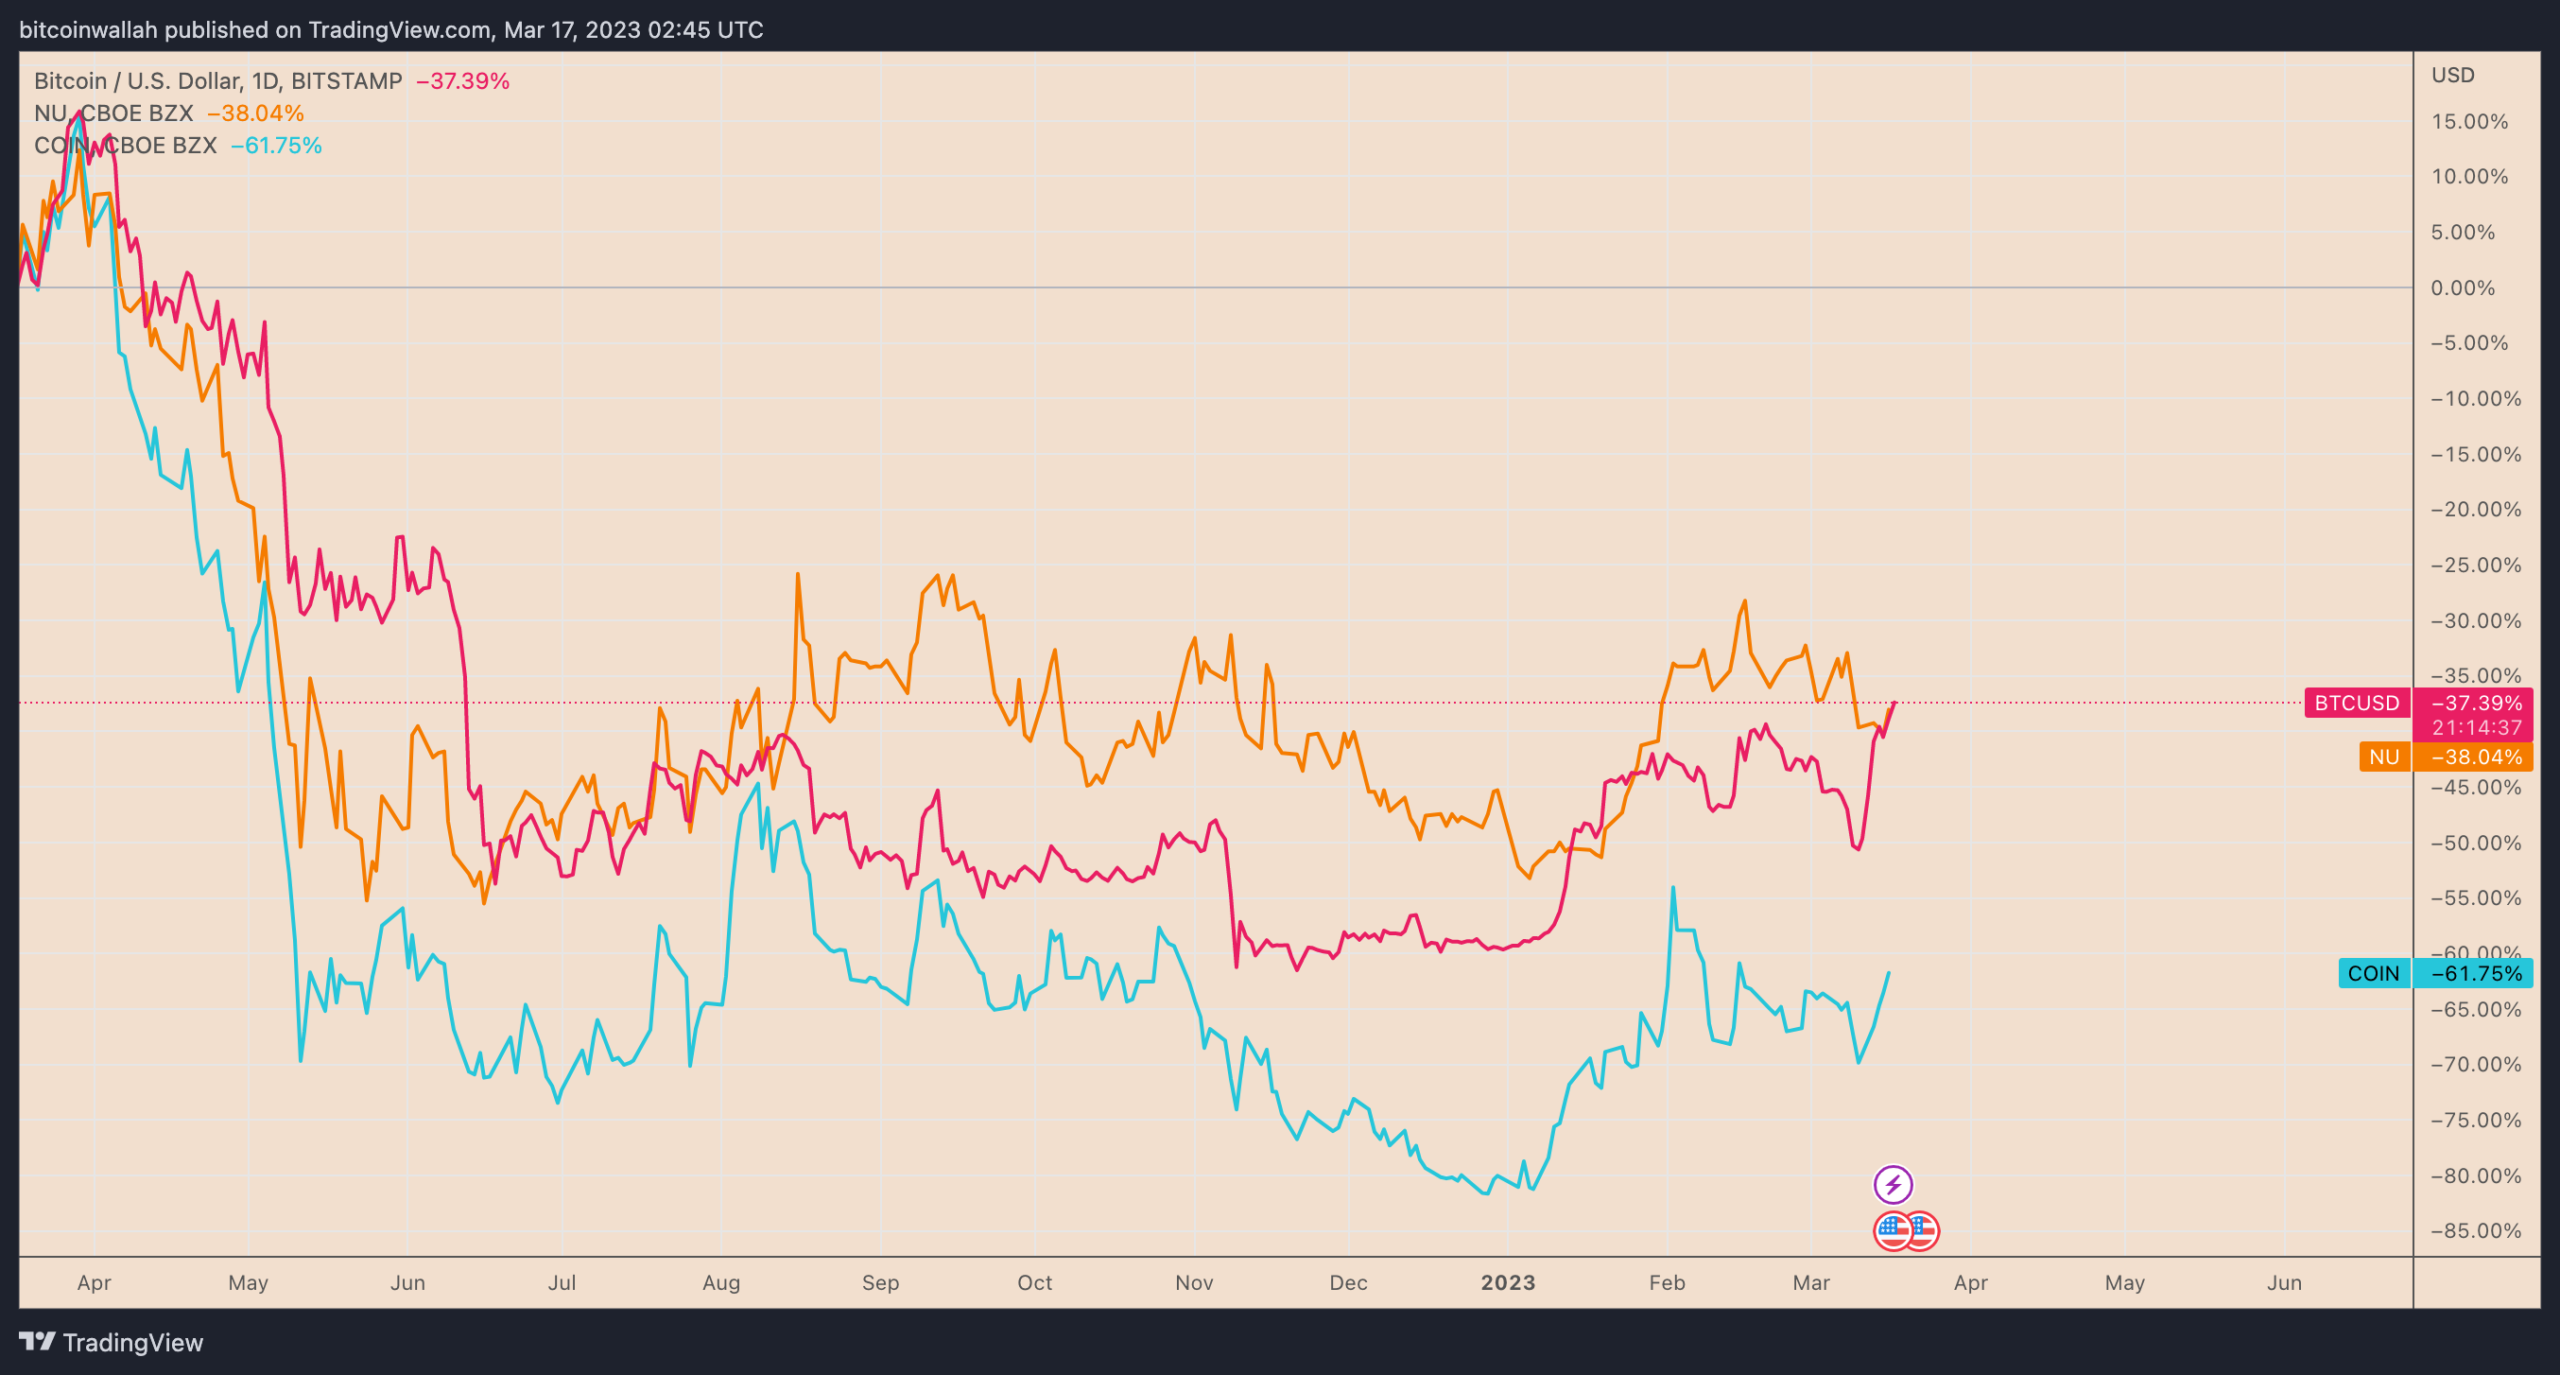 Yearly performance comparison of BTCUSD COIN and NU. scaled